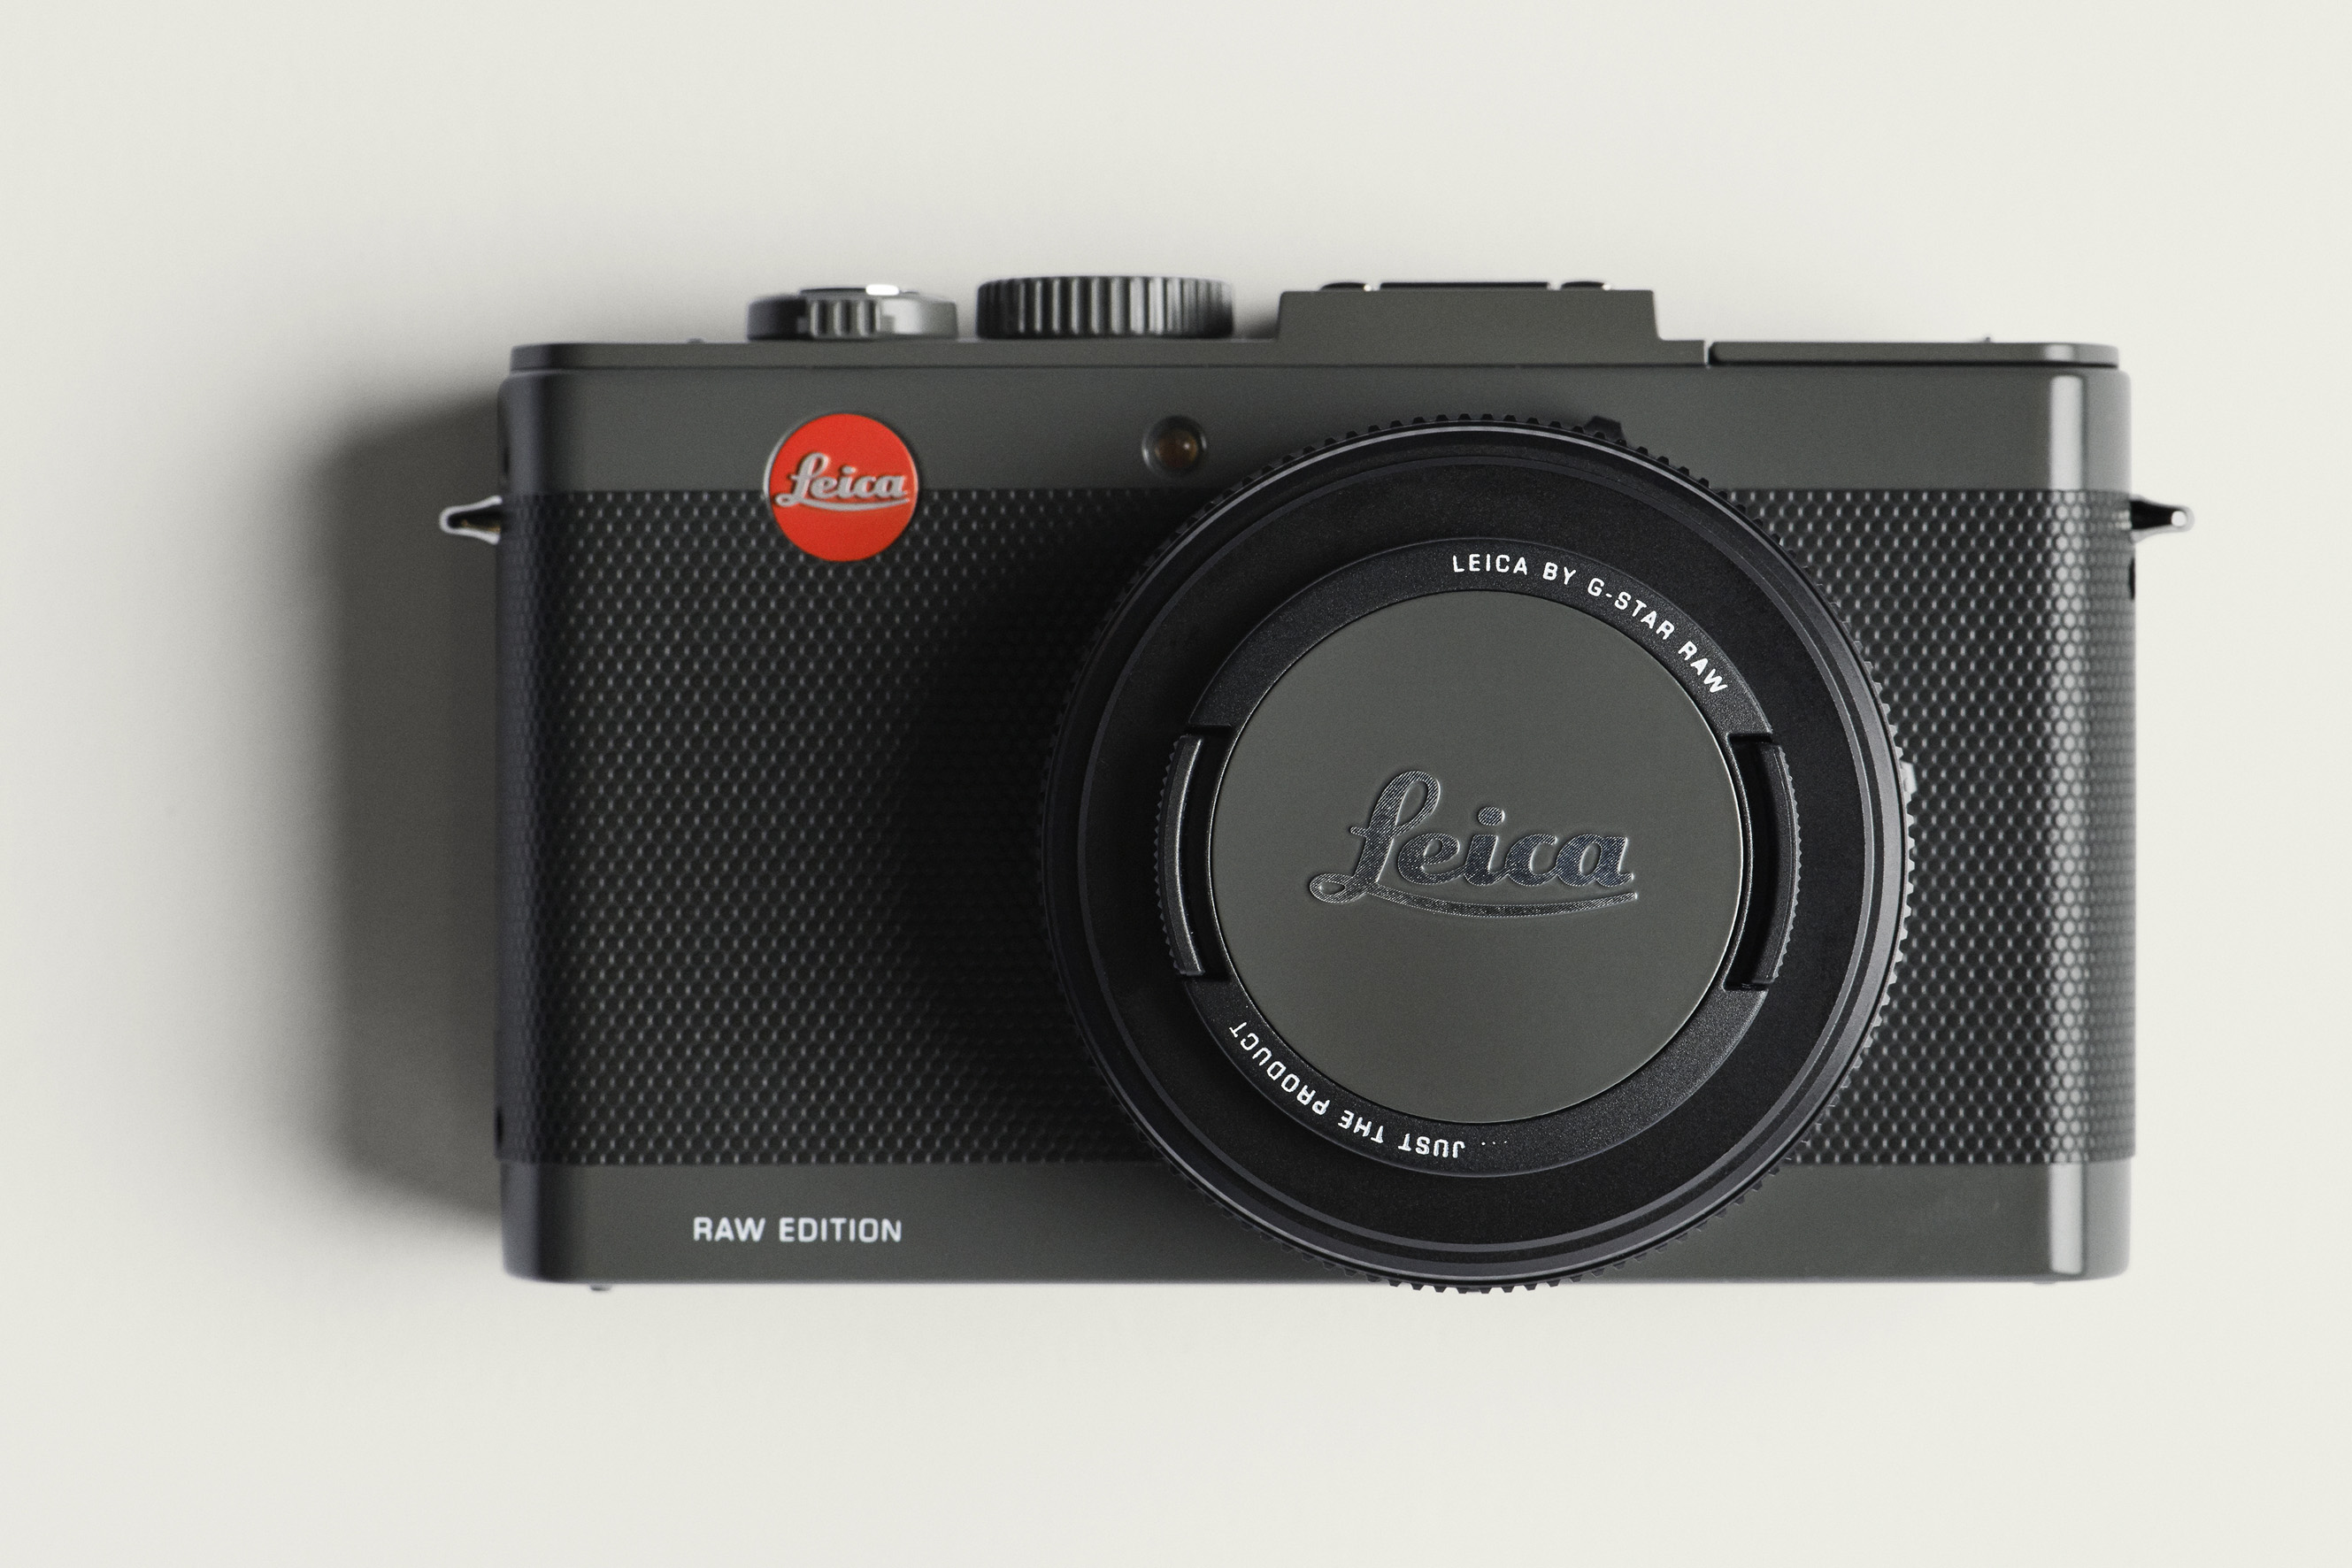 THE EXCLUSIVE LEICA D-LUX 6 BY G-STAR RAW